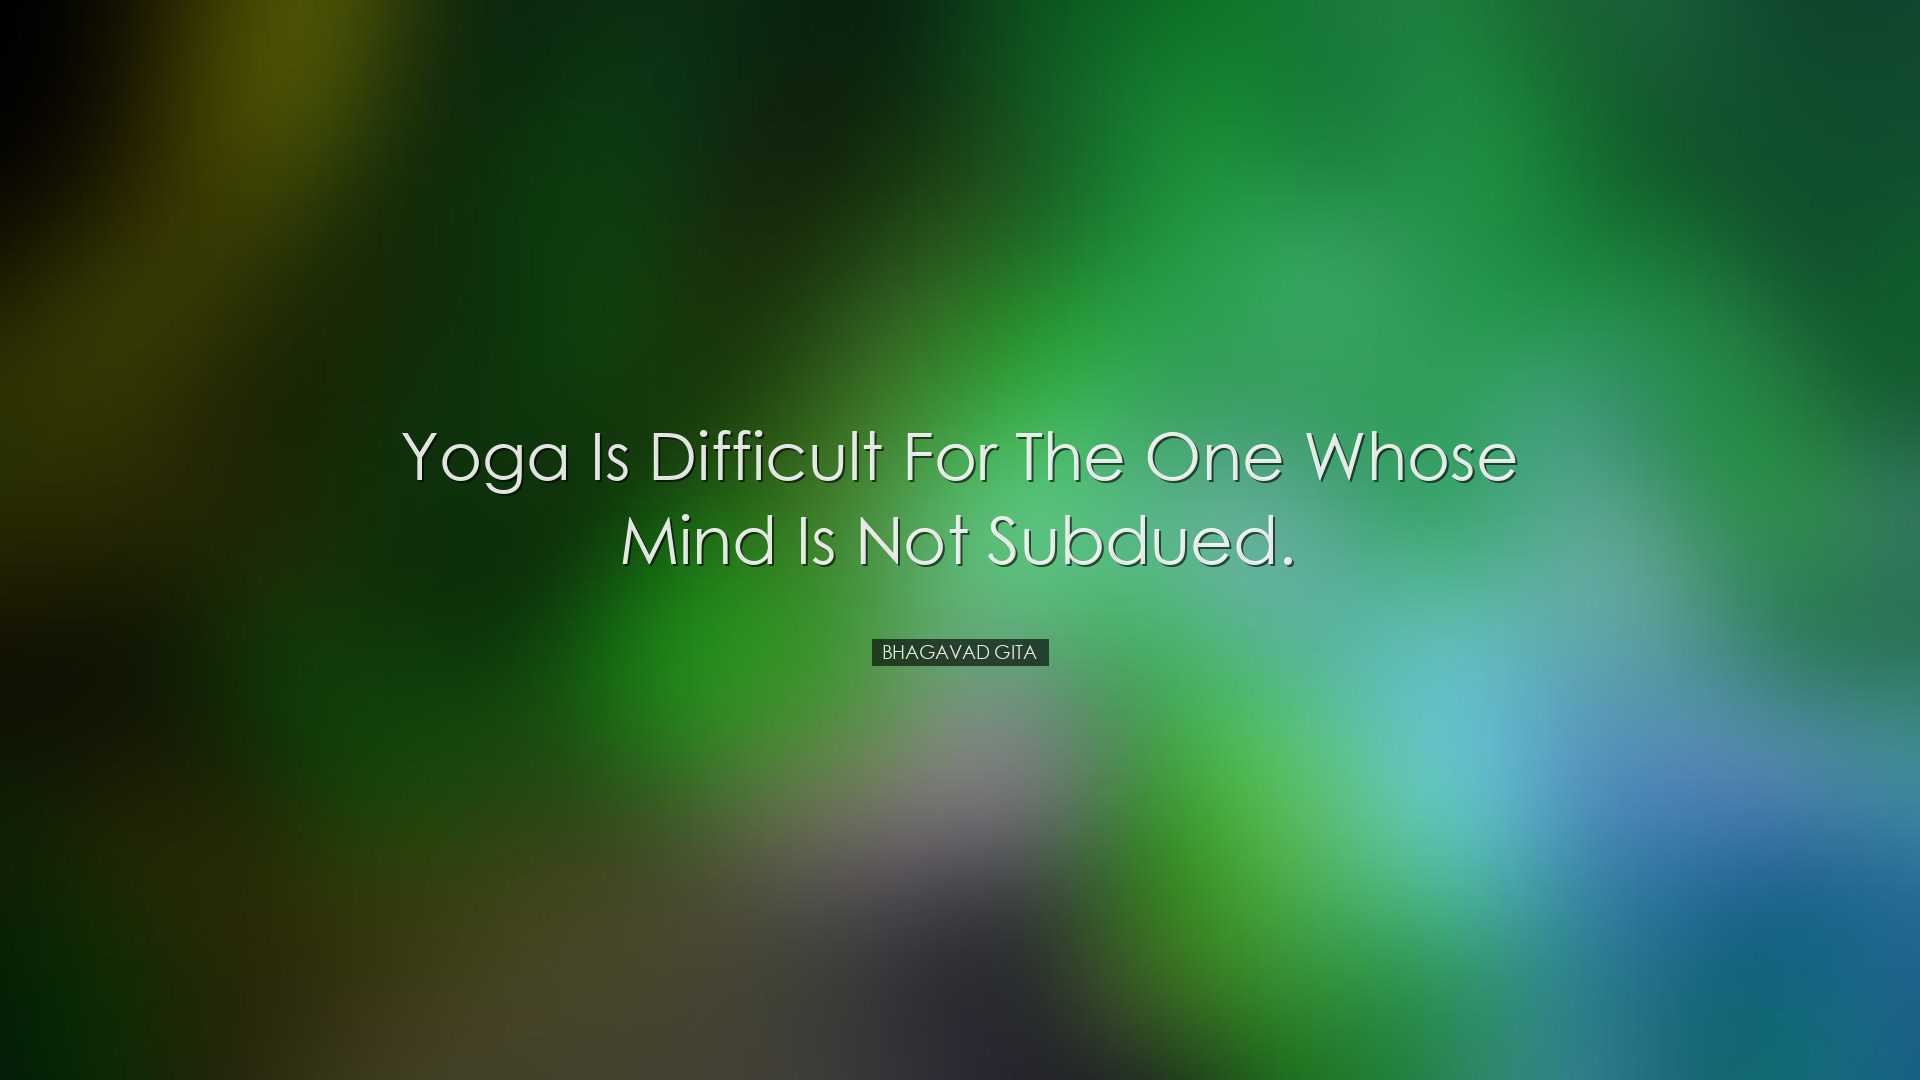 Yoga is difficult for the one whose mind is not subdued. - Bhagava